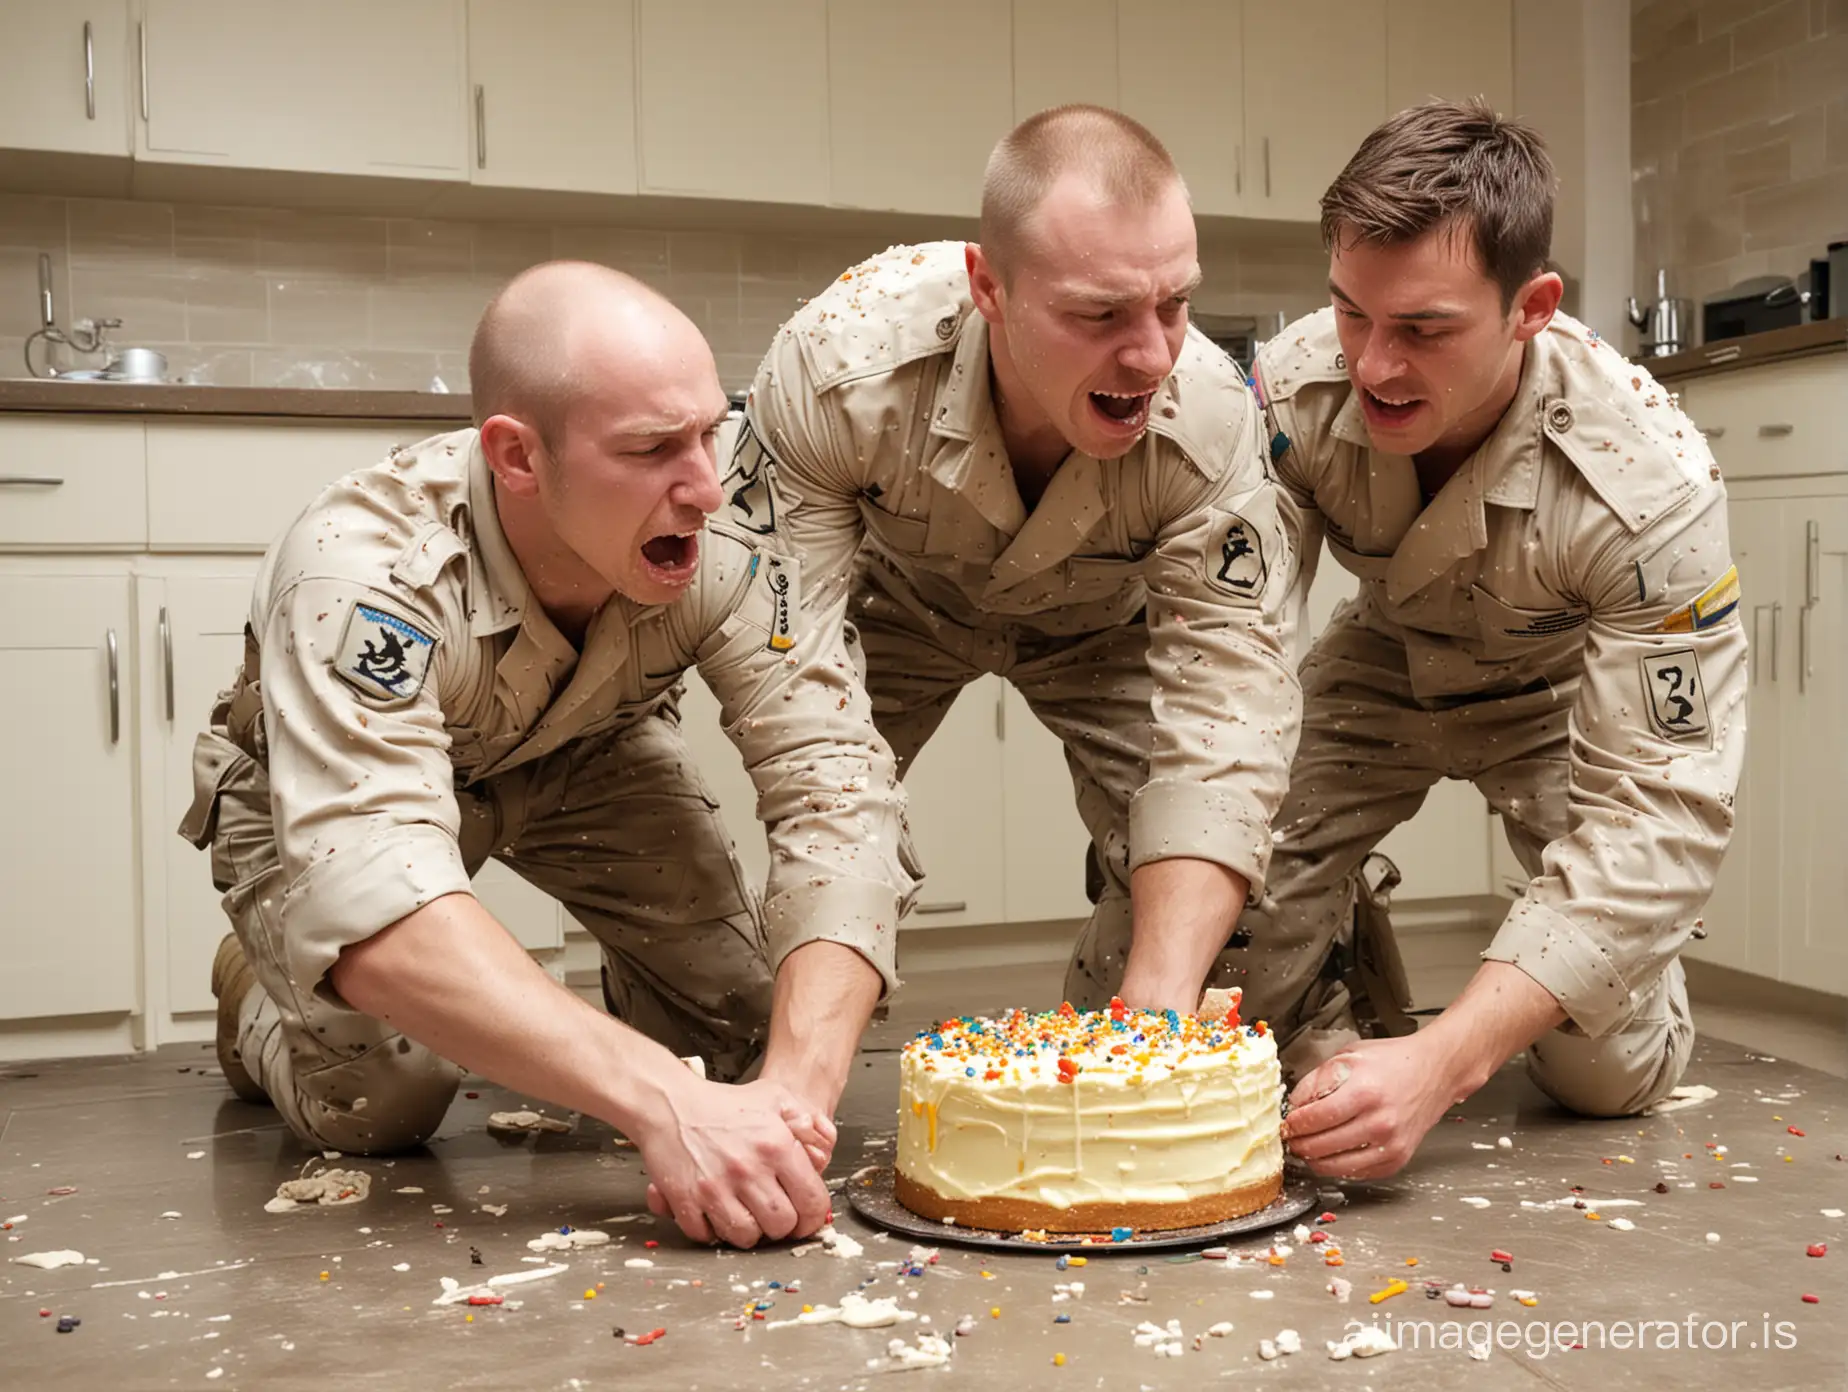 Two-Gay-Soldiers-Engaged-in-Cake-Fighting-in-Kitchen